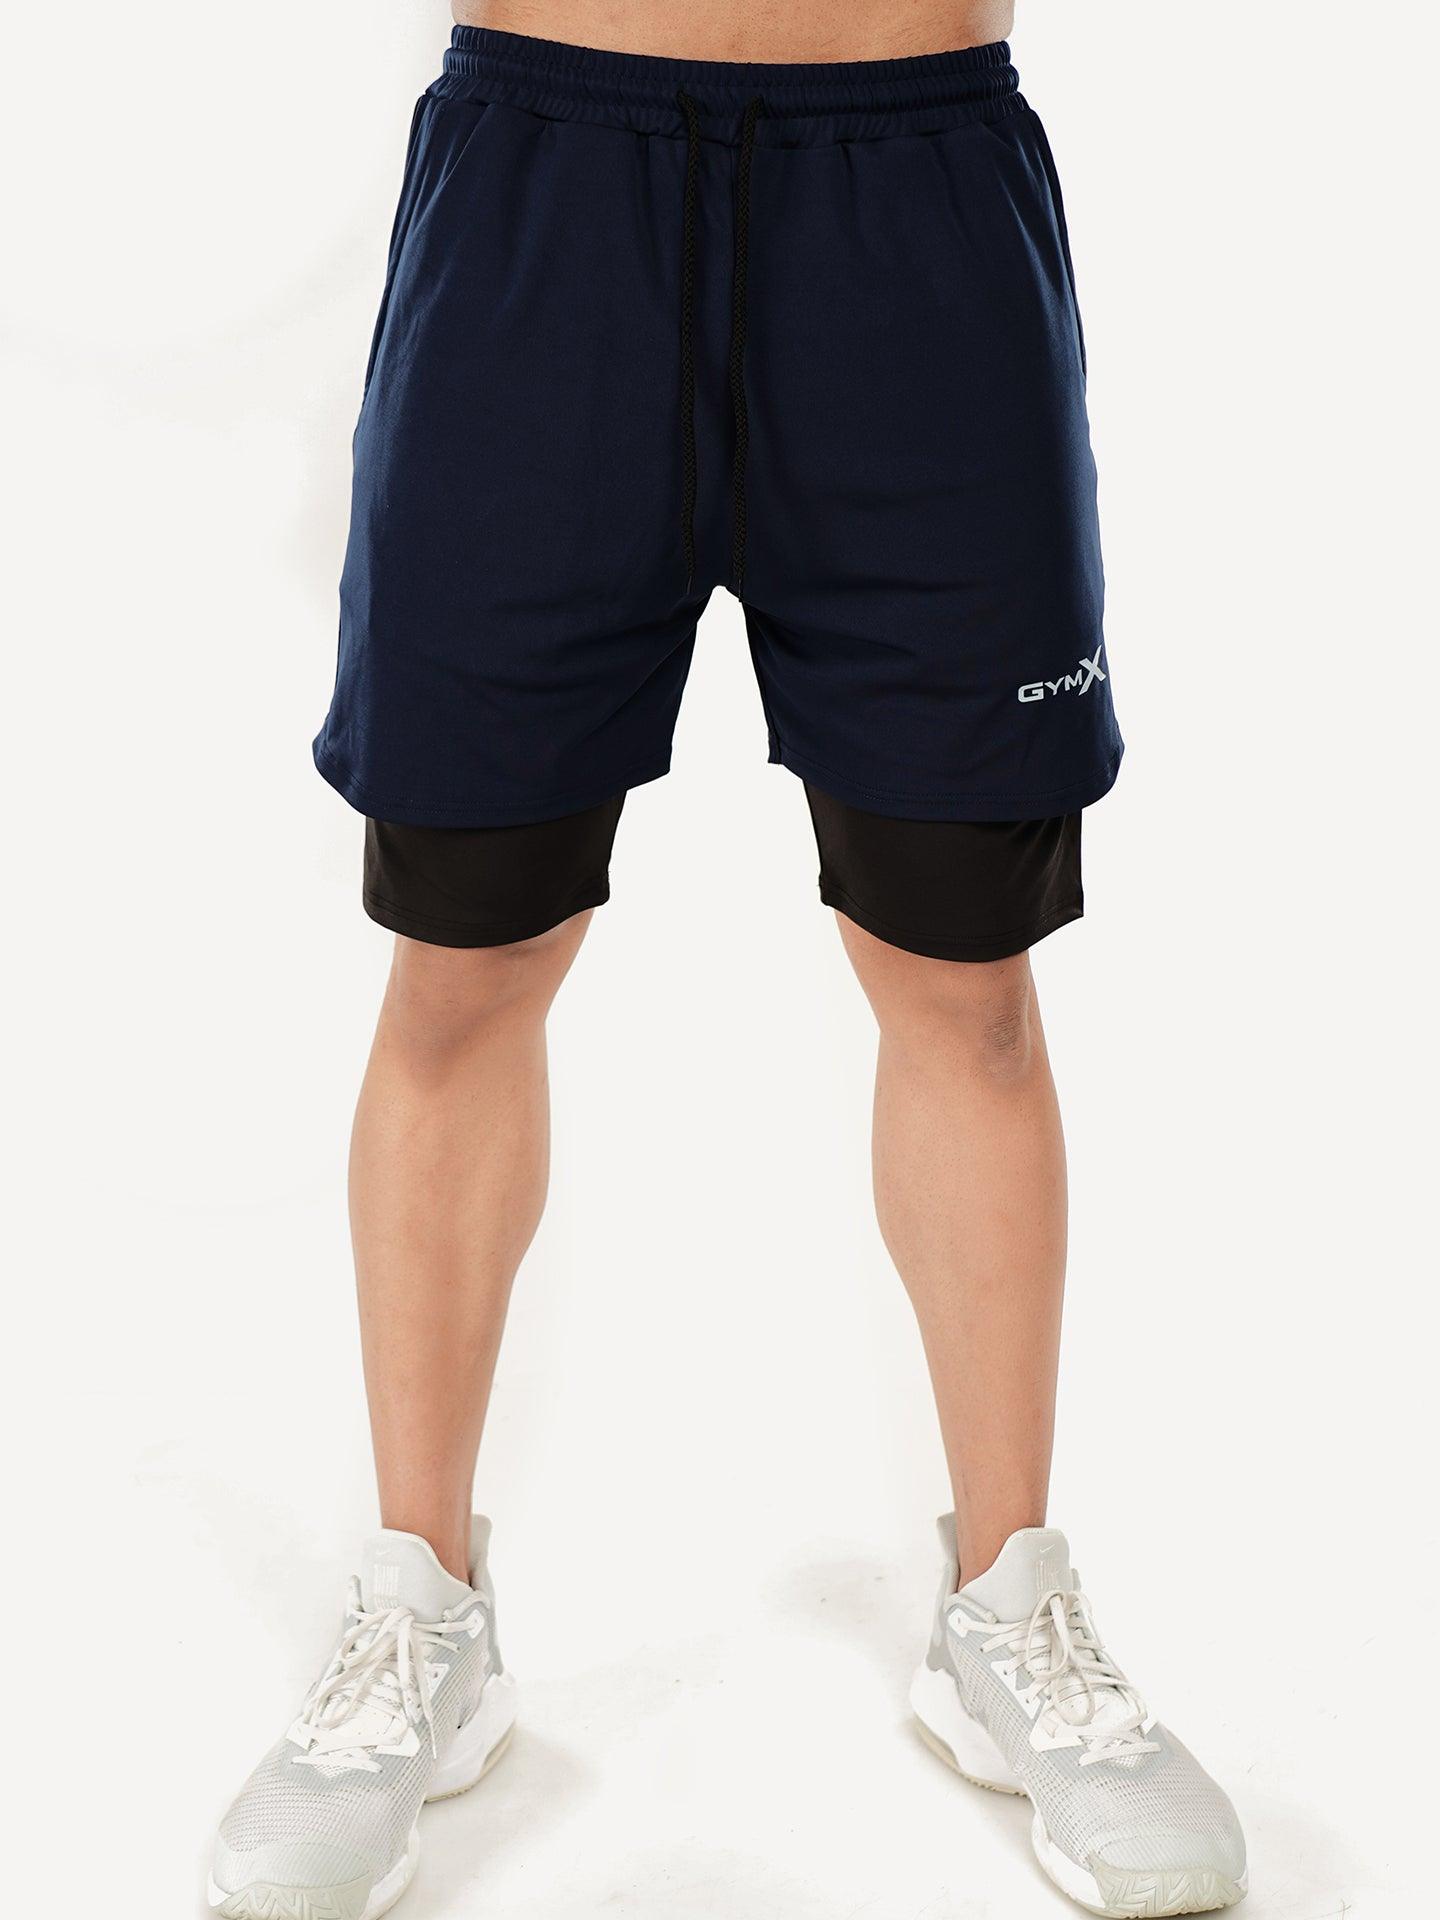 2-in-1 Shorts with phone pocket: Sublime Blue- Sale - GymX